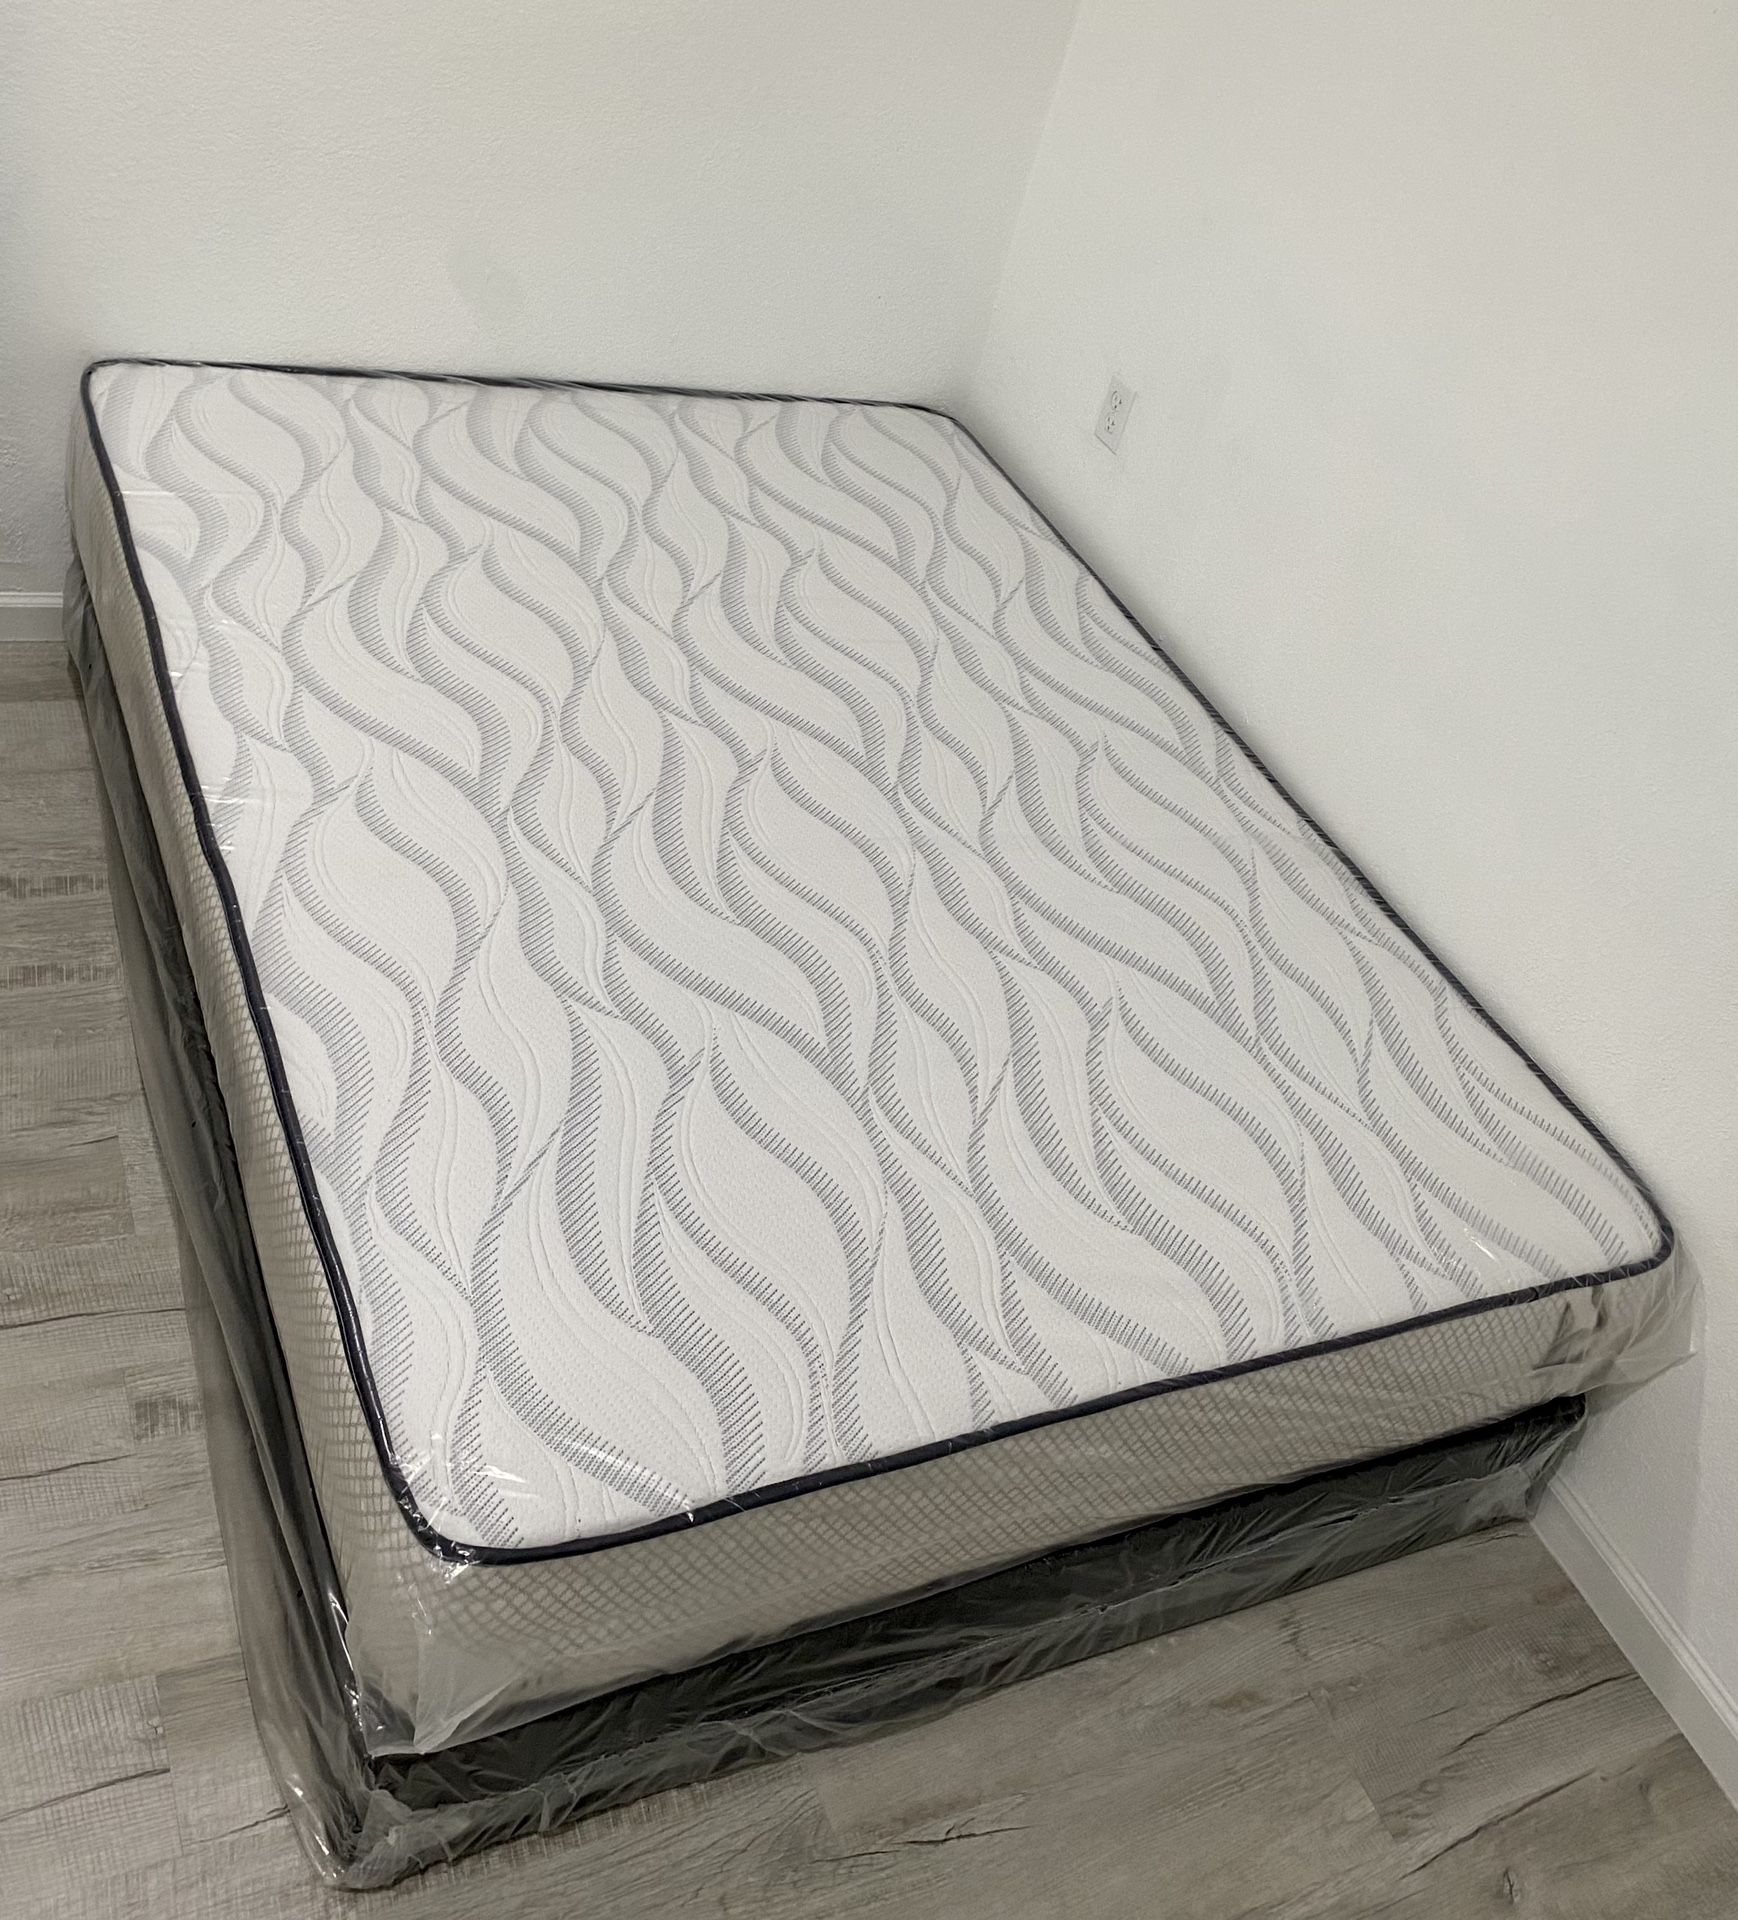 Full Size Mattress 10 Inch With Box Springs & Metal Bed Frame Set New From Factory Available All Size Same Day Delivery